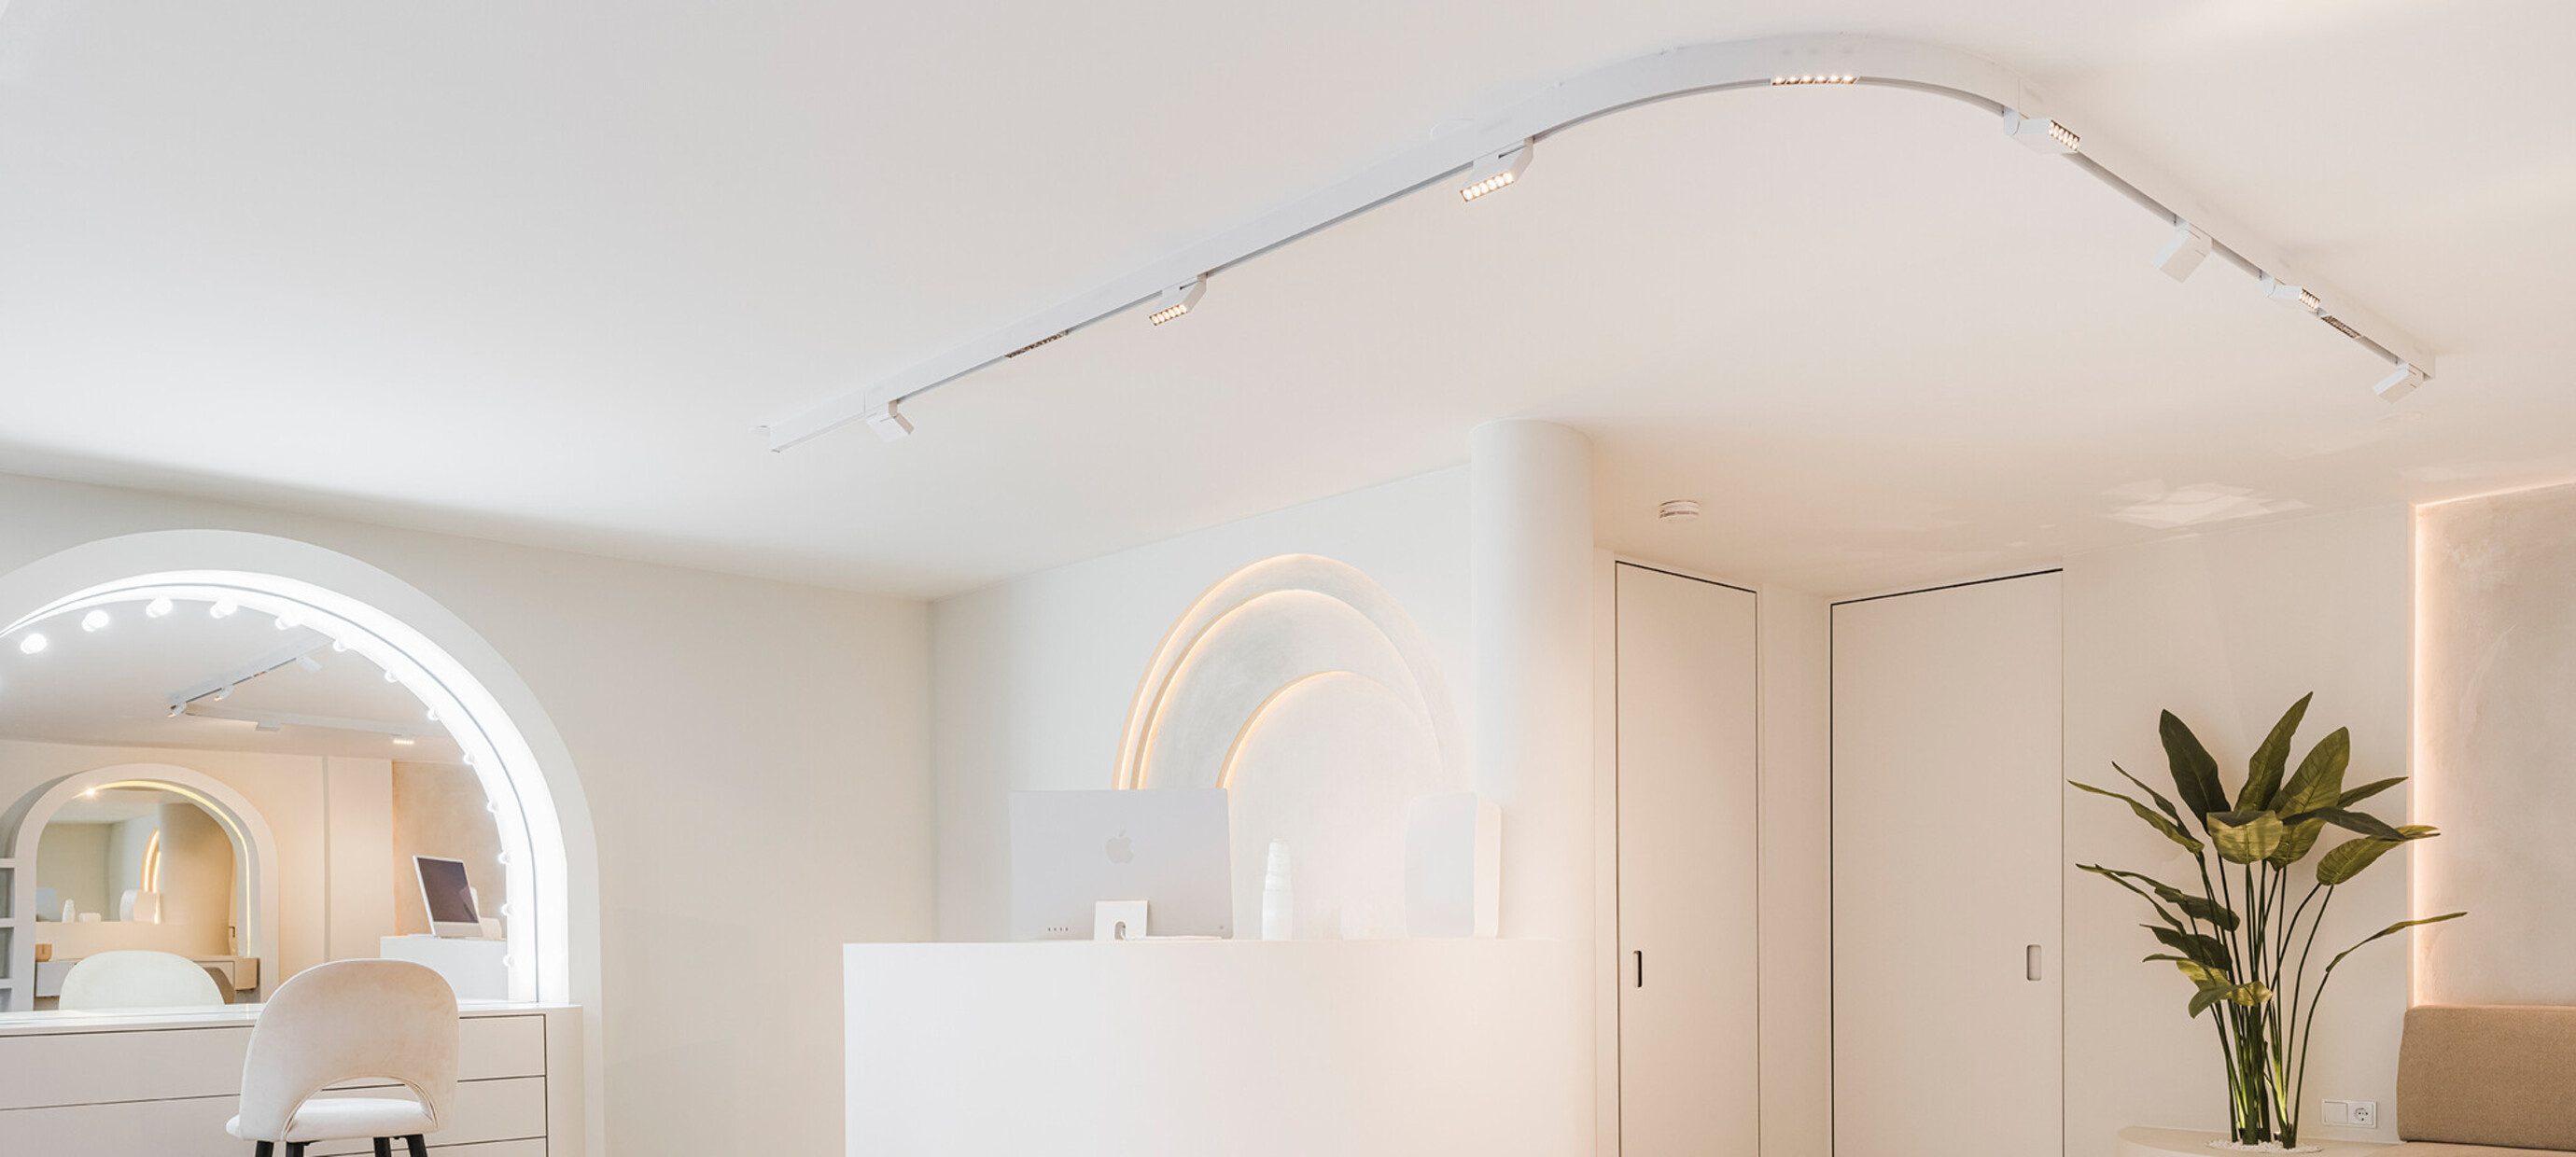 Project: Flexible lighting for optimal use